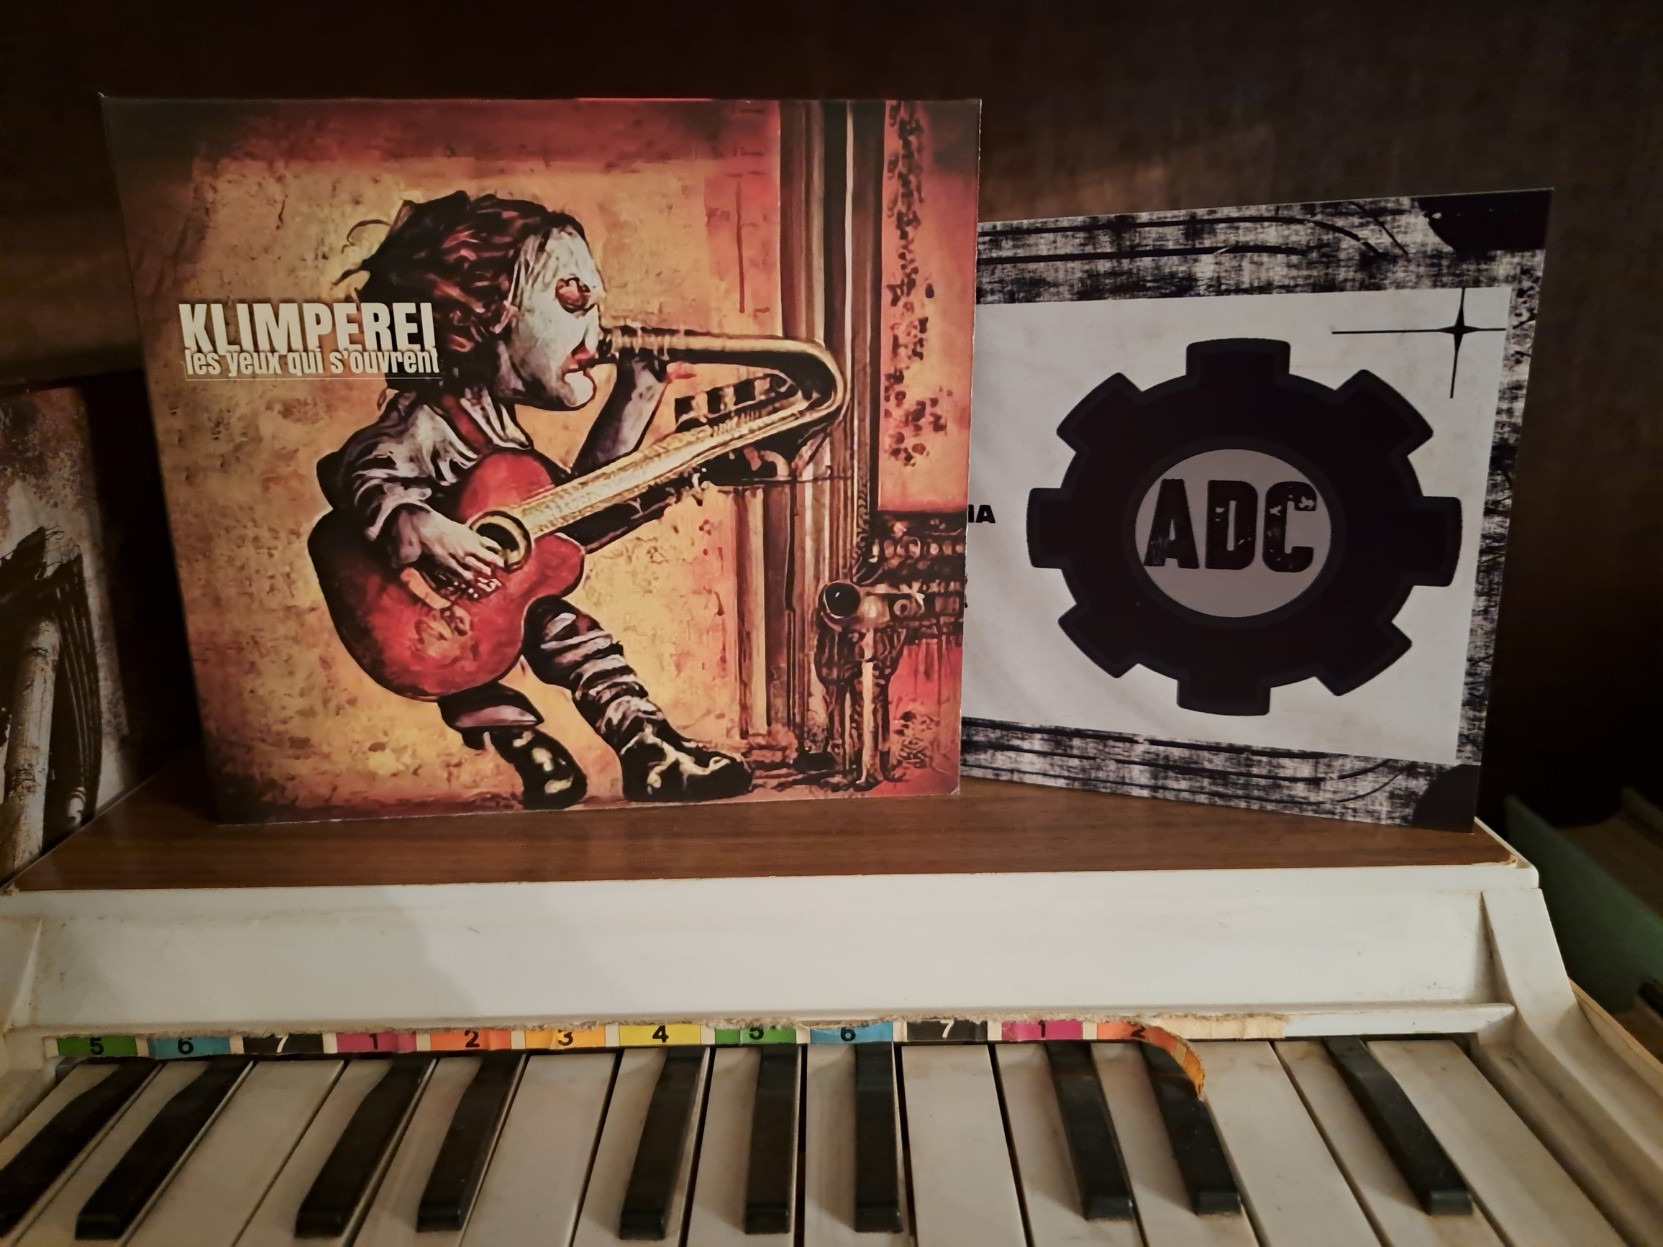 Klimperei's latest release of his toy music, over a toy piano, in front of an ADC postcard (ADC being the label that released this album).